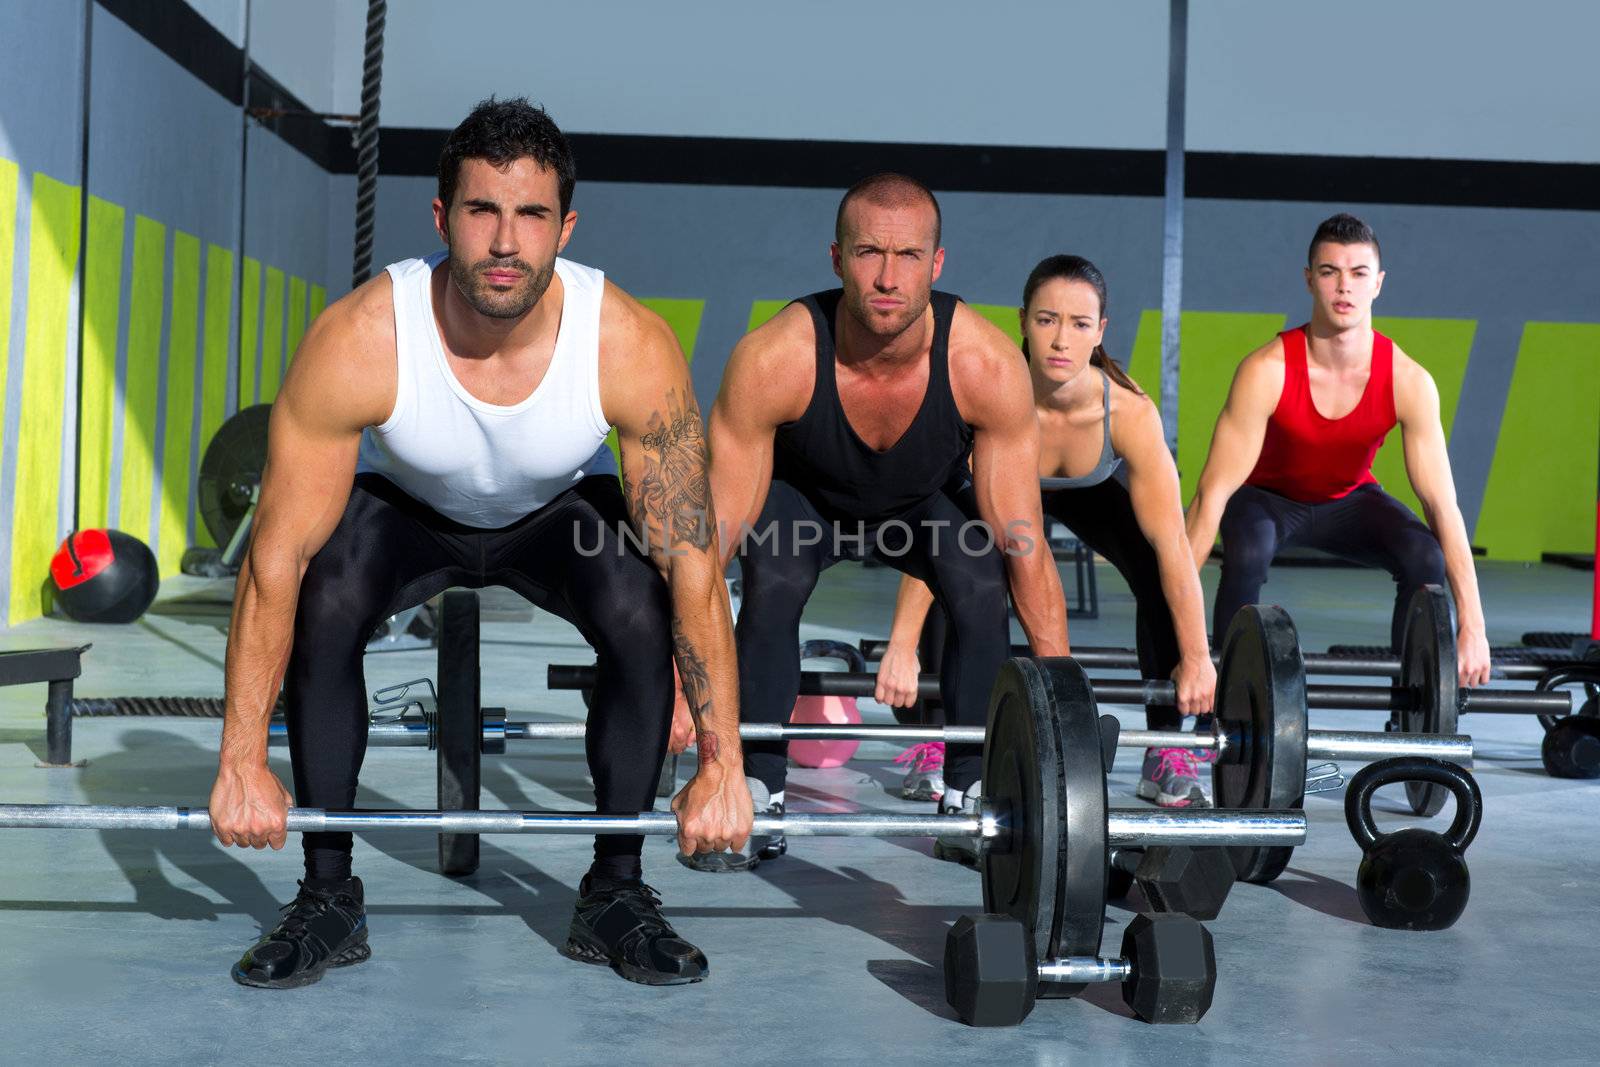 gym group with weight lifting bar workout in crossfit exercise